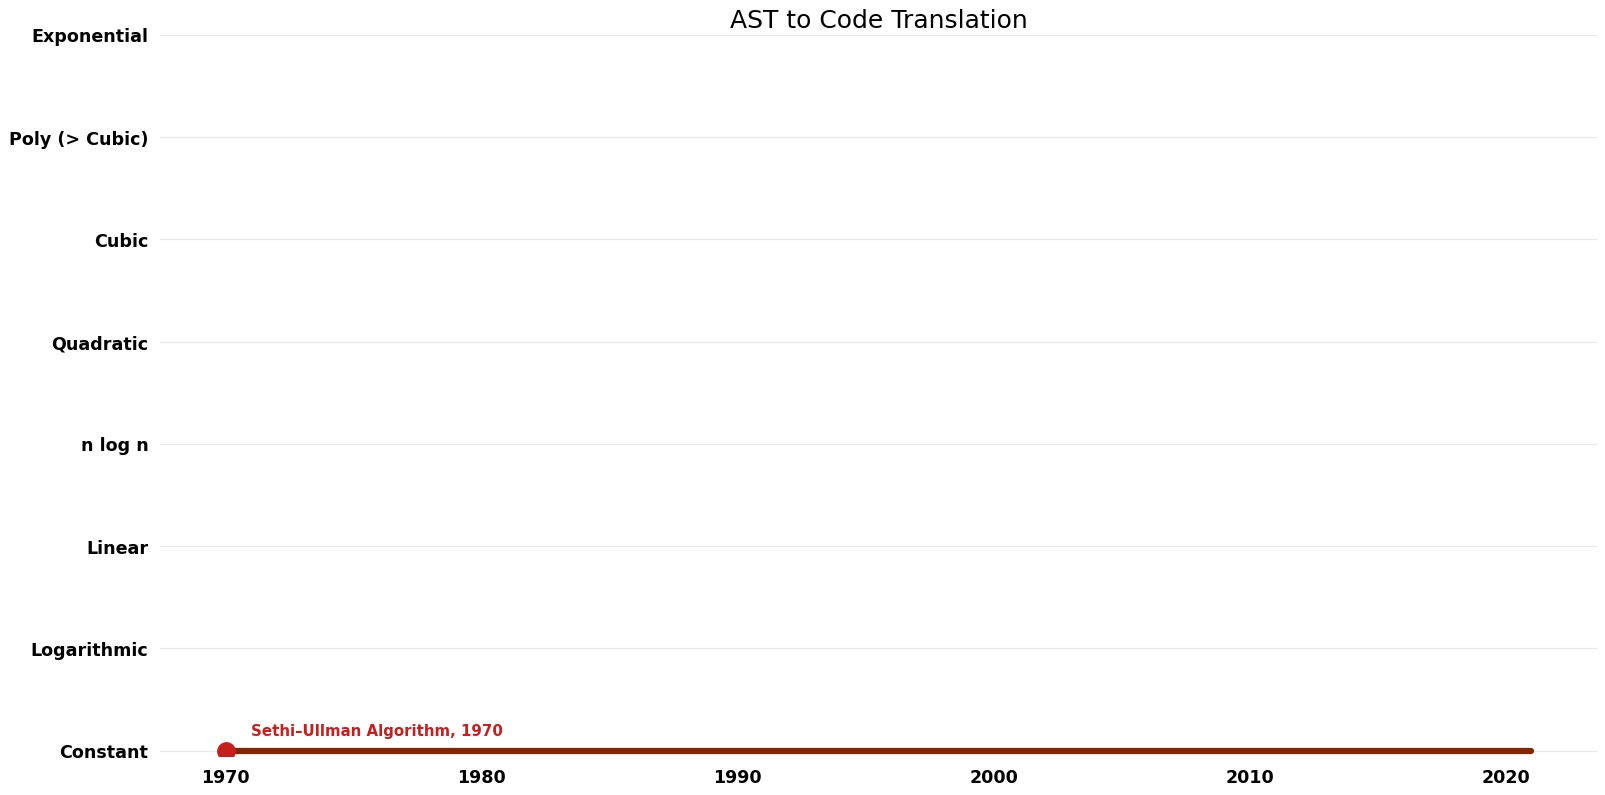 File:AST to Code Translation - Space.png